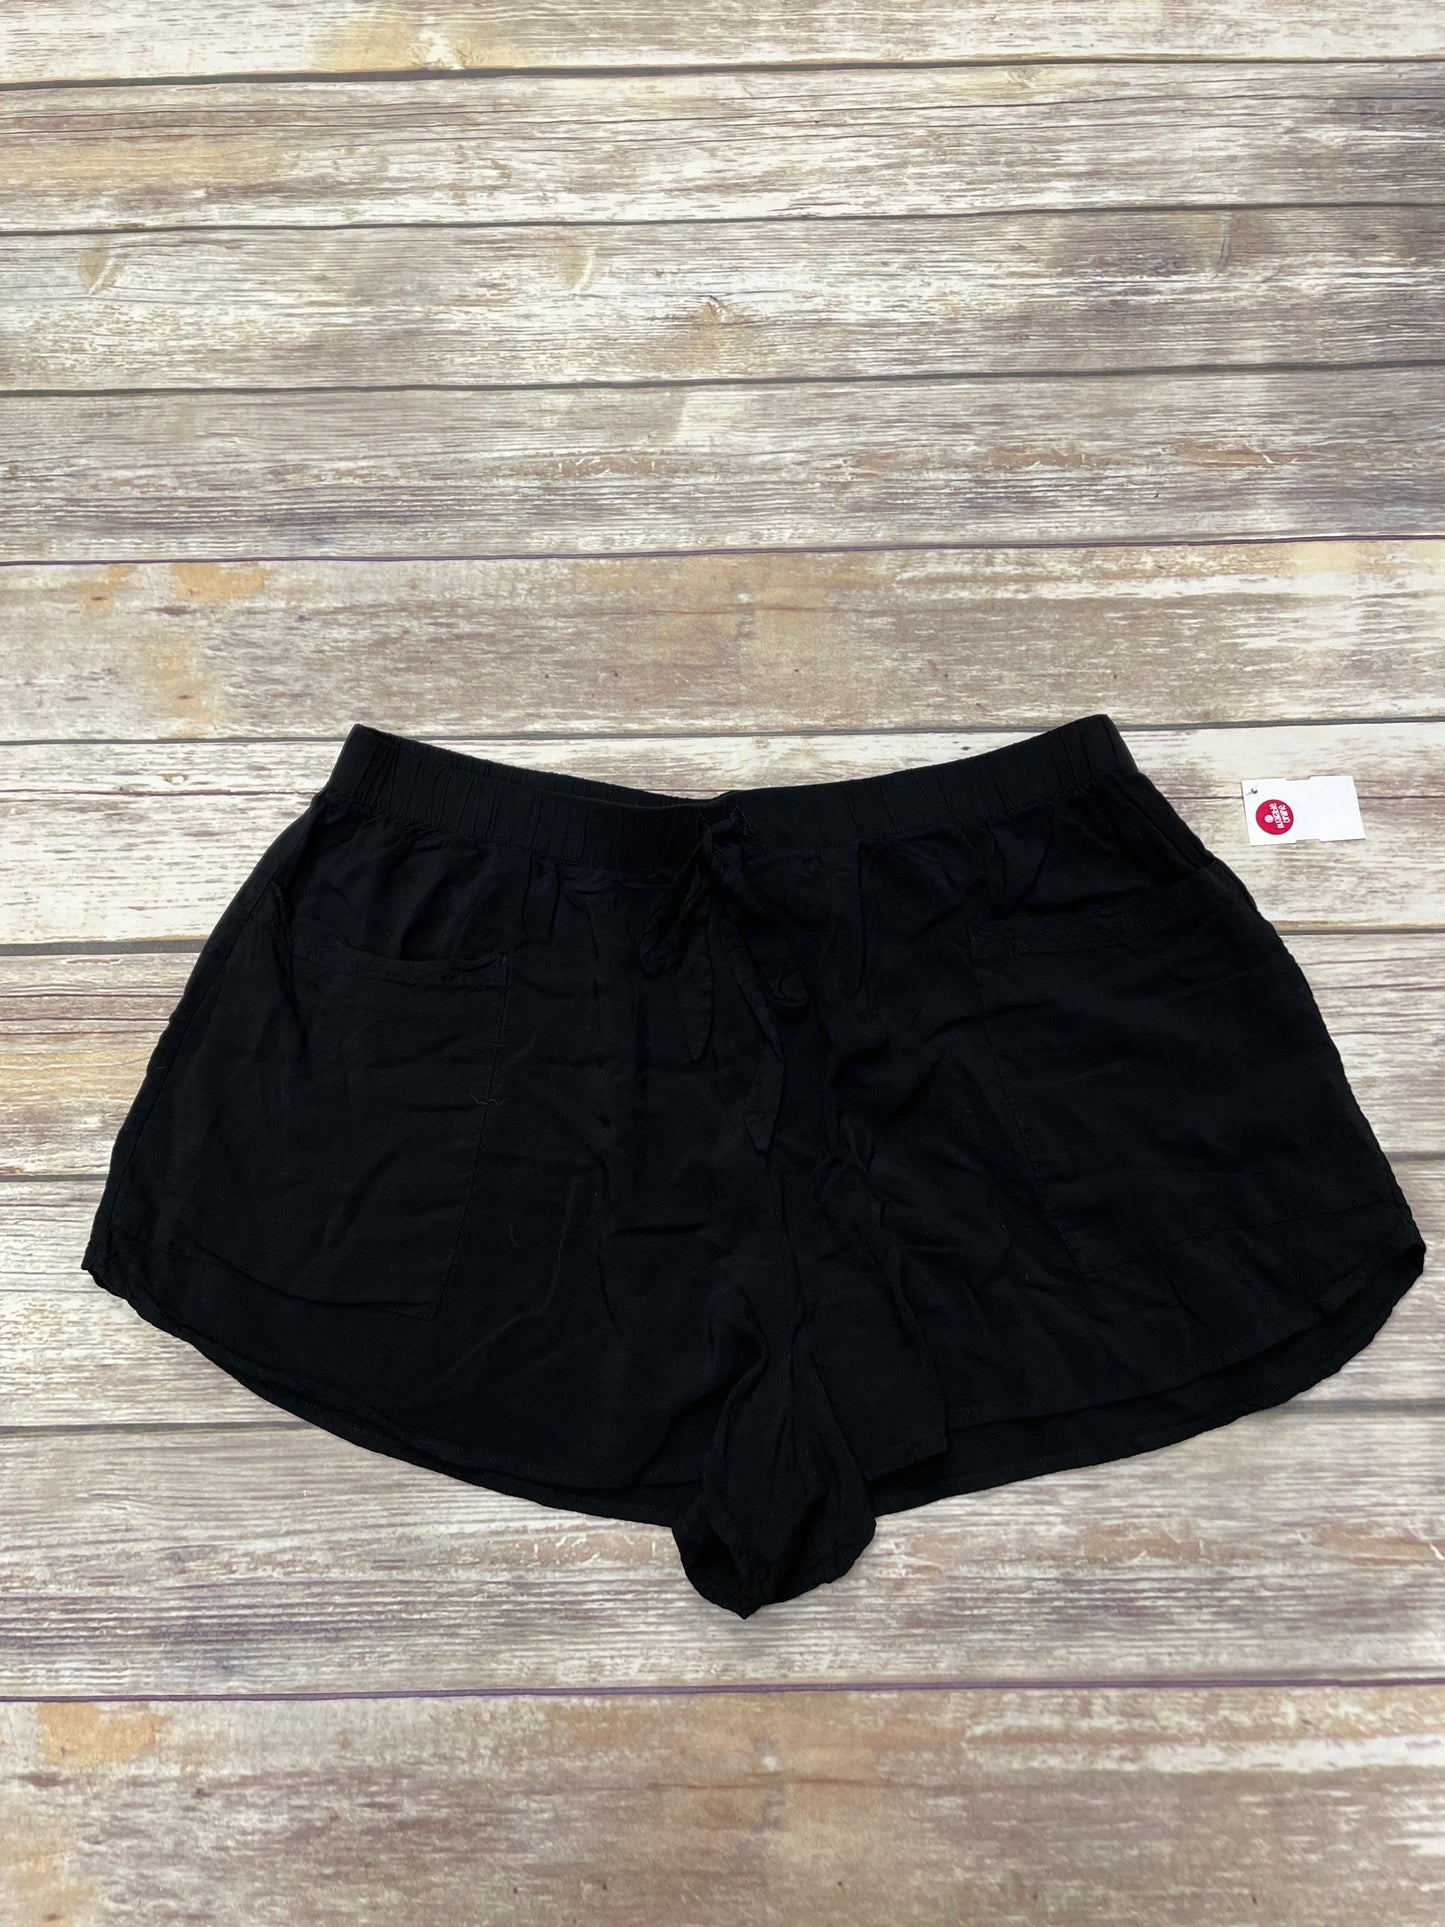 Black Shorts Abercrombie And Fitch, Size Xl